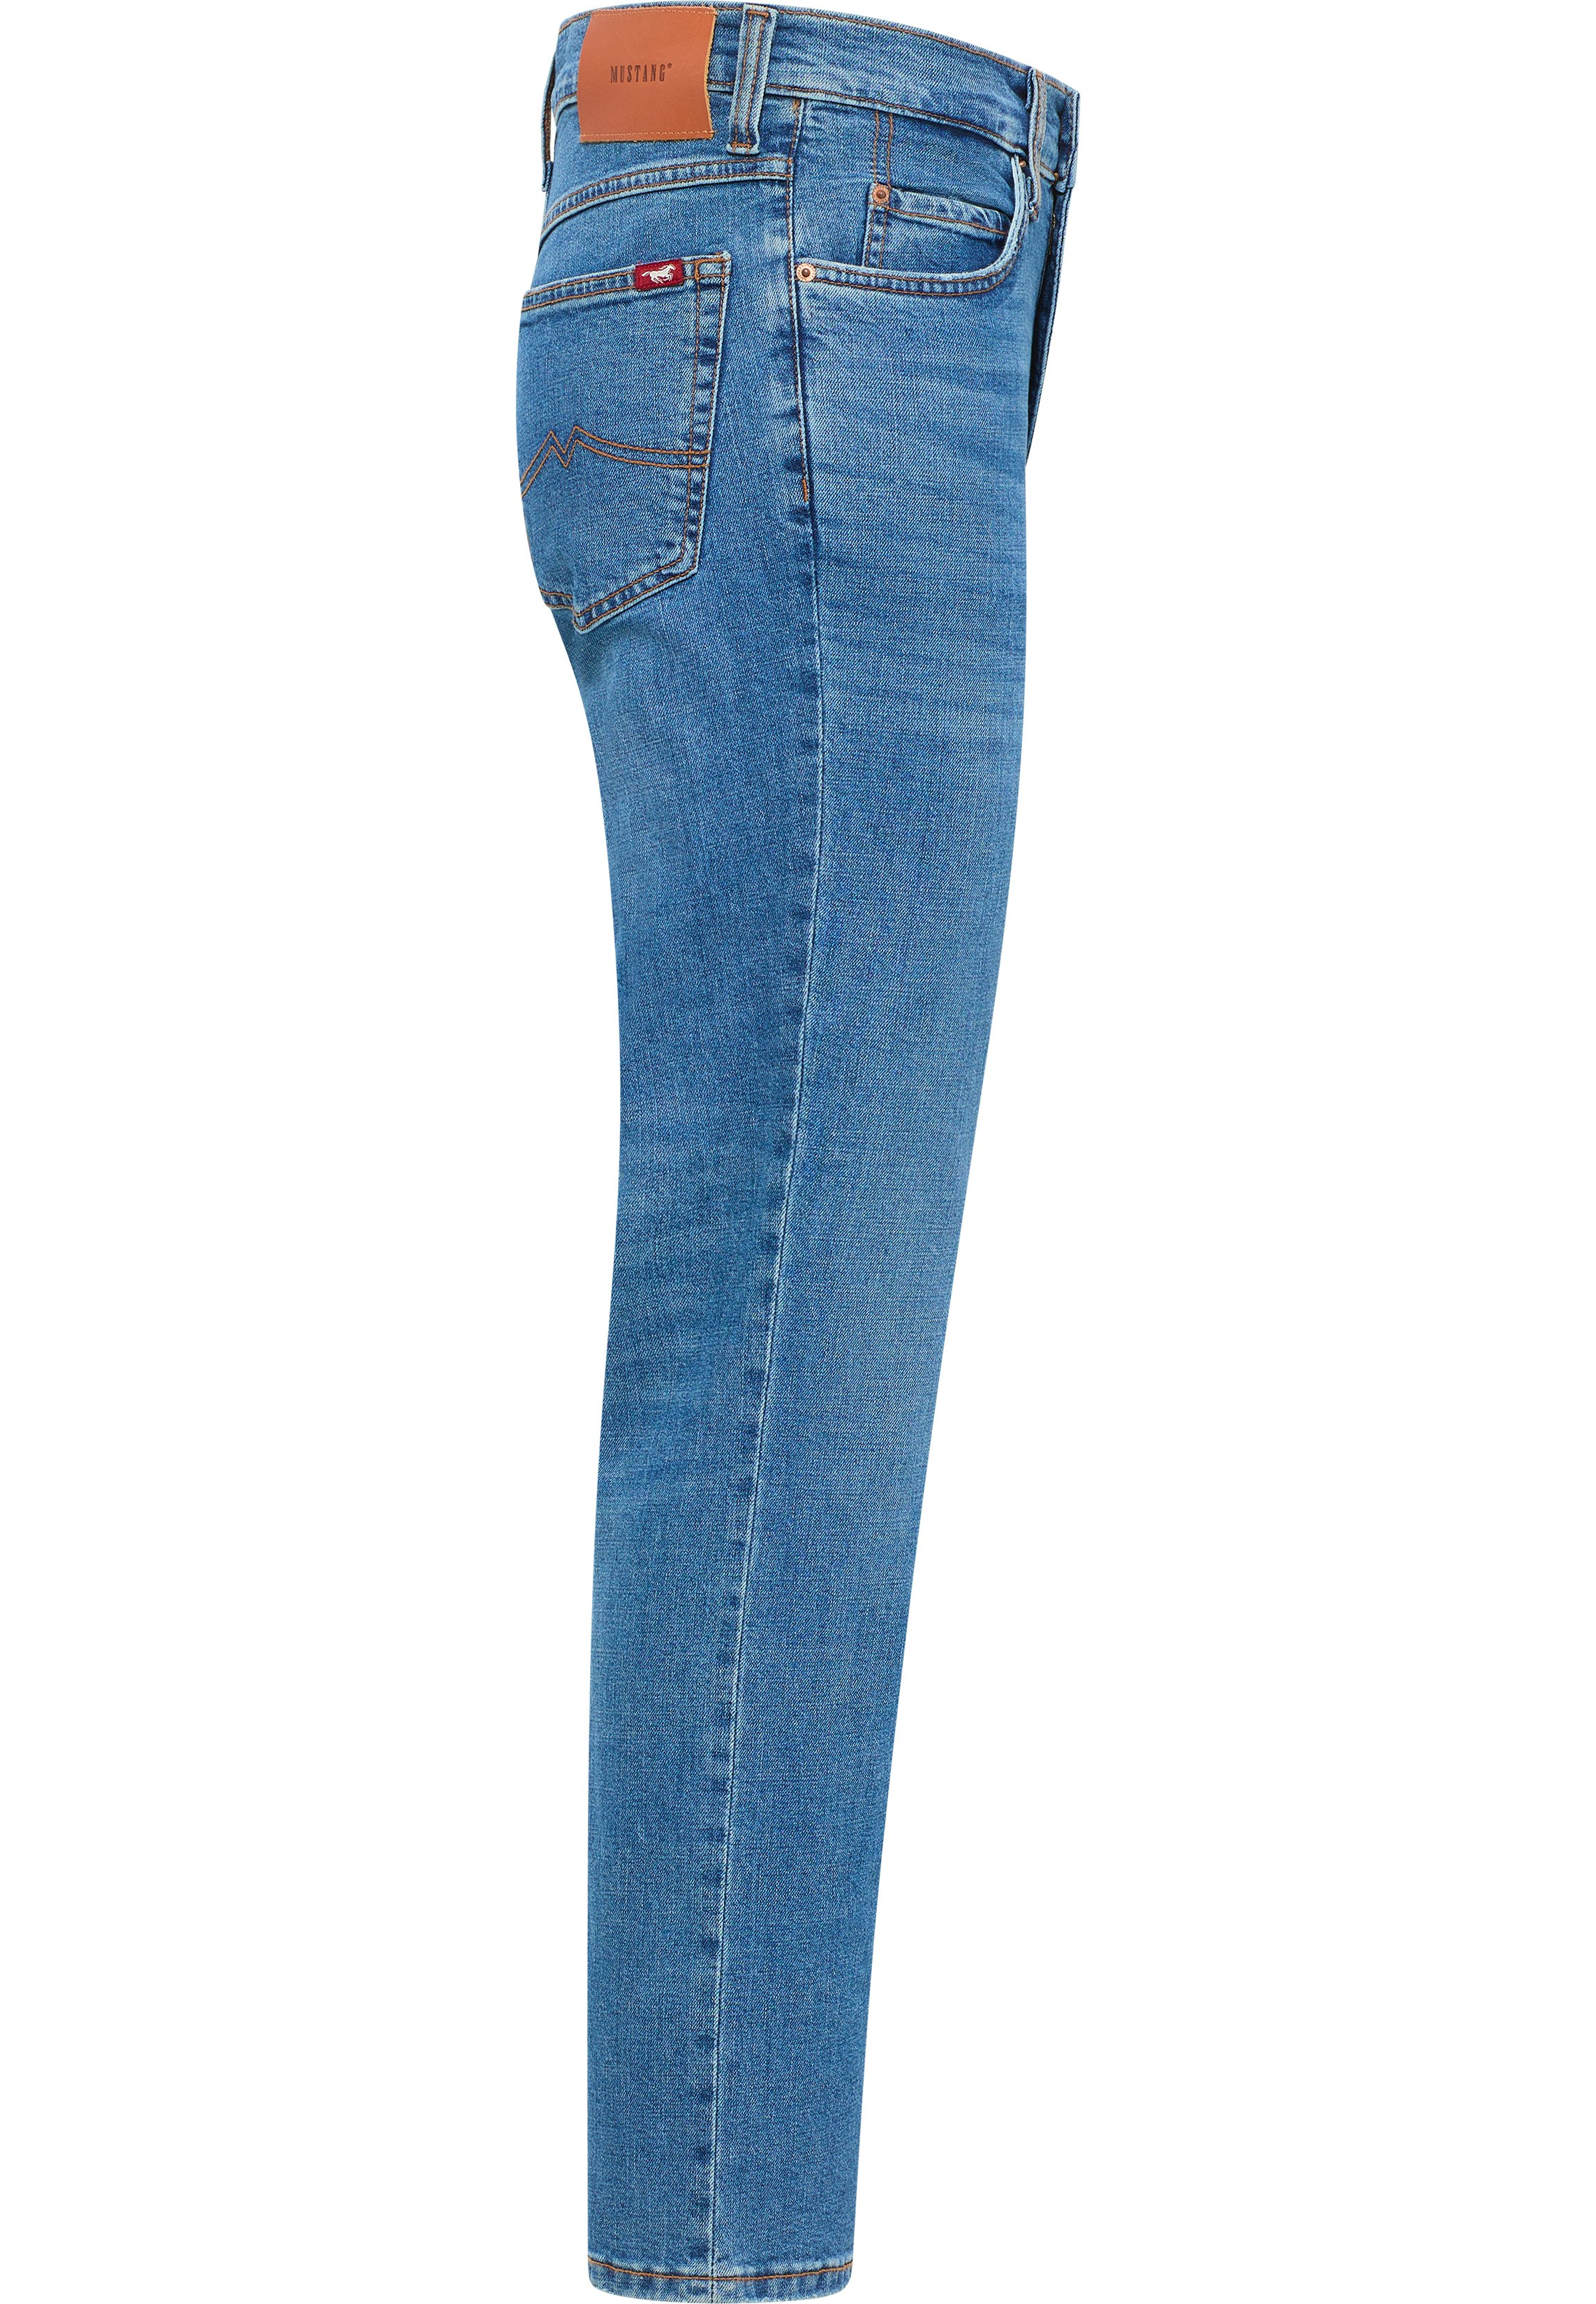 Mustang Jeans Tramper Straight Fit marina blue extra lang